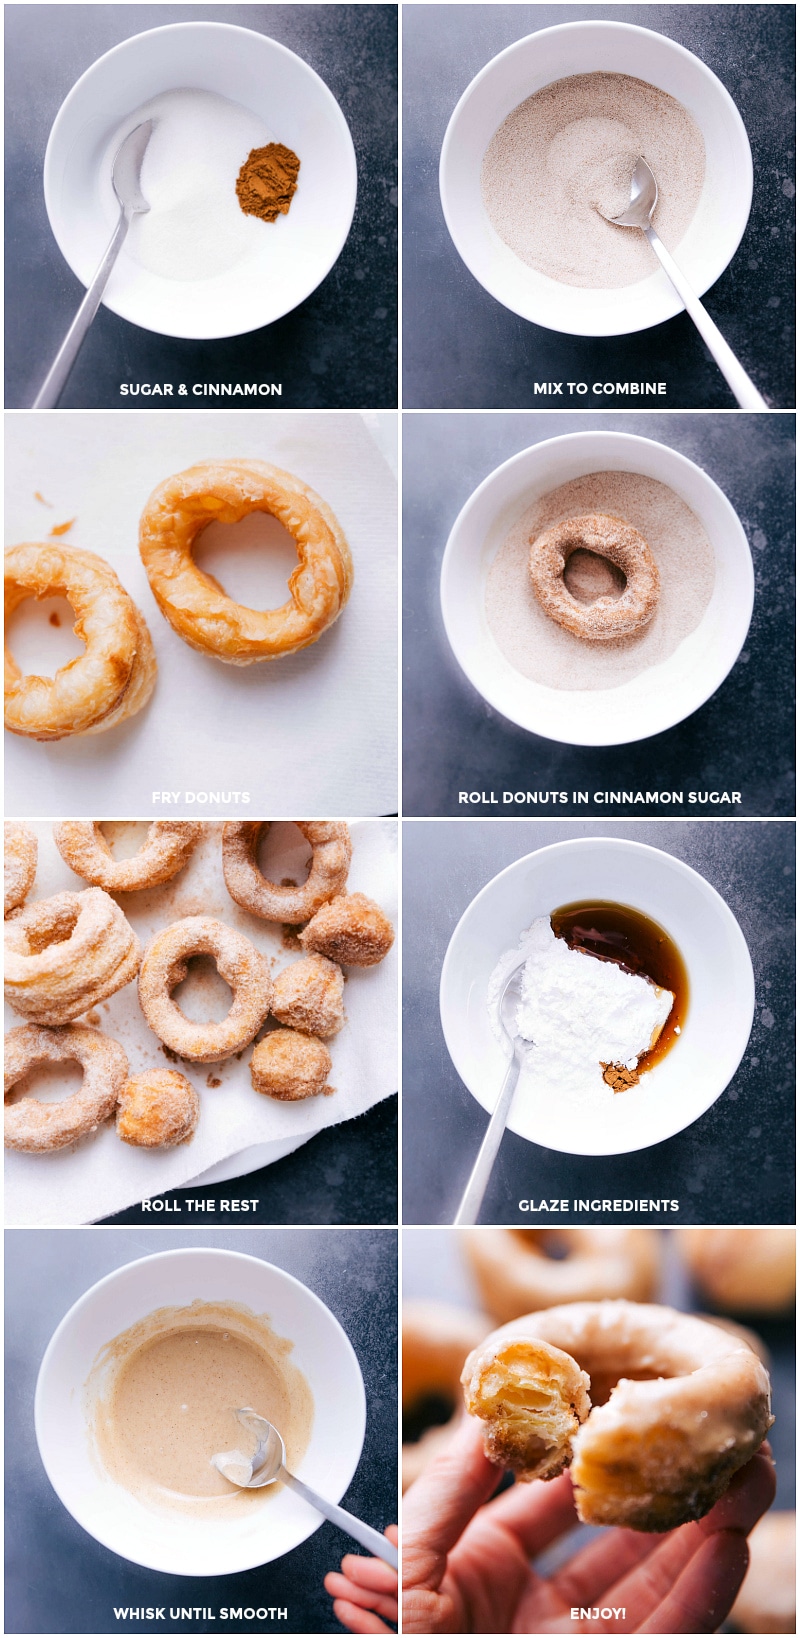 Process shots: combine the sugar and cinnamon; fry the pastry; roll in cinnamon-sugar mixture; combine glaze ingredients; drizzle on the Cronut.